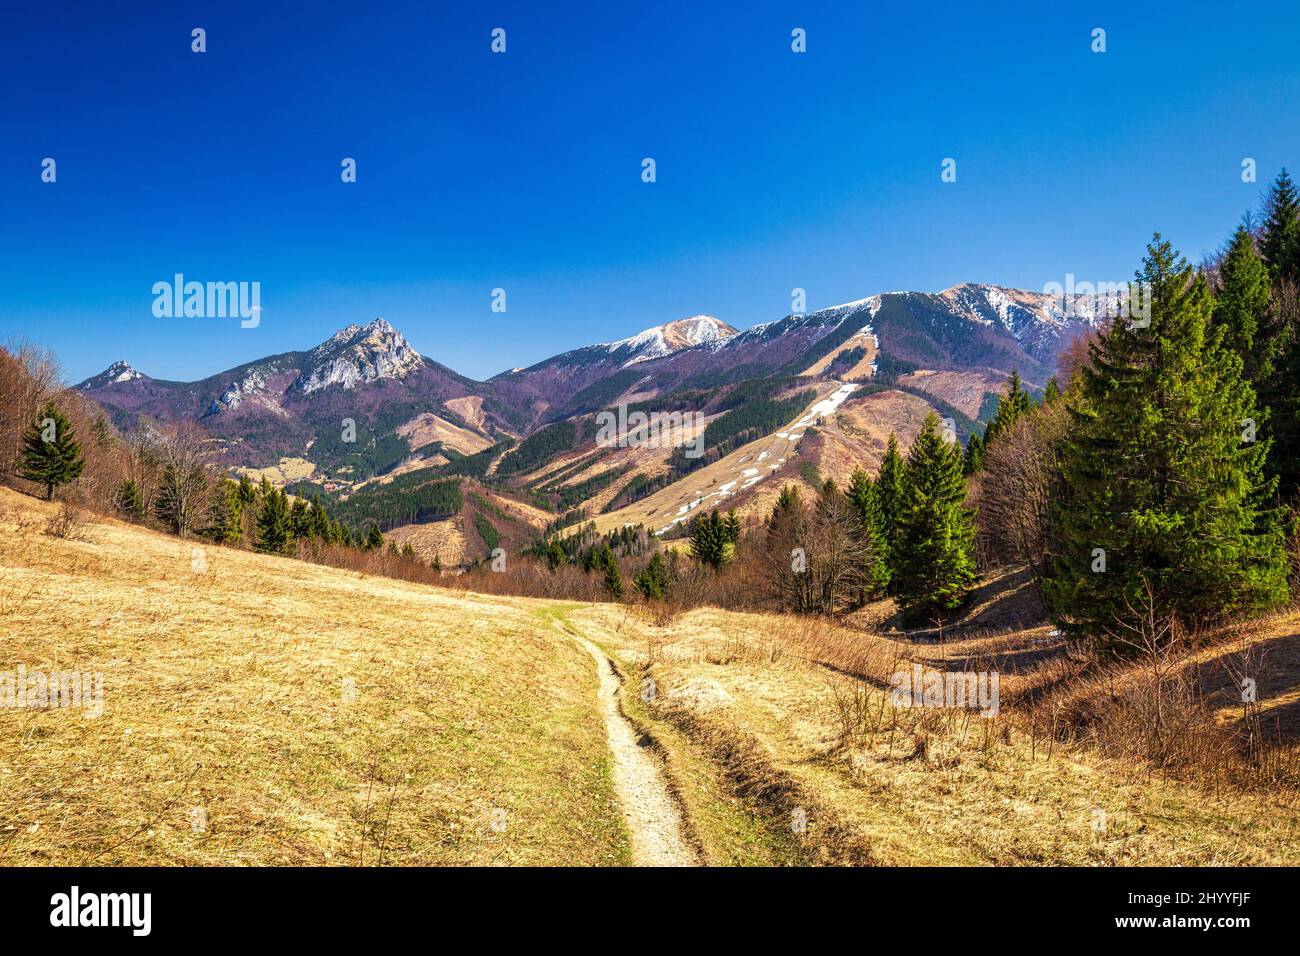 Landscape with mountains springtime. The Vratna Valley in The Mala Fatra National Park in Slovakia, Europe. Stock Photo